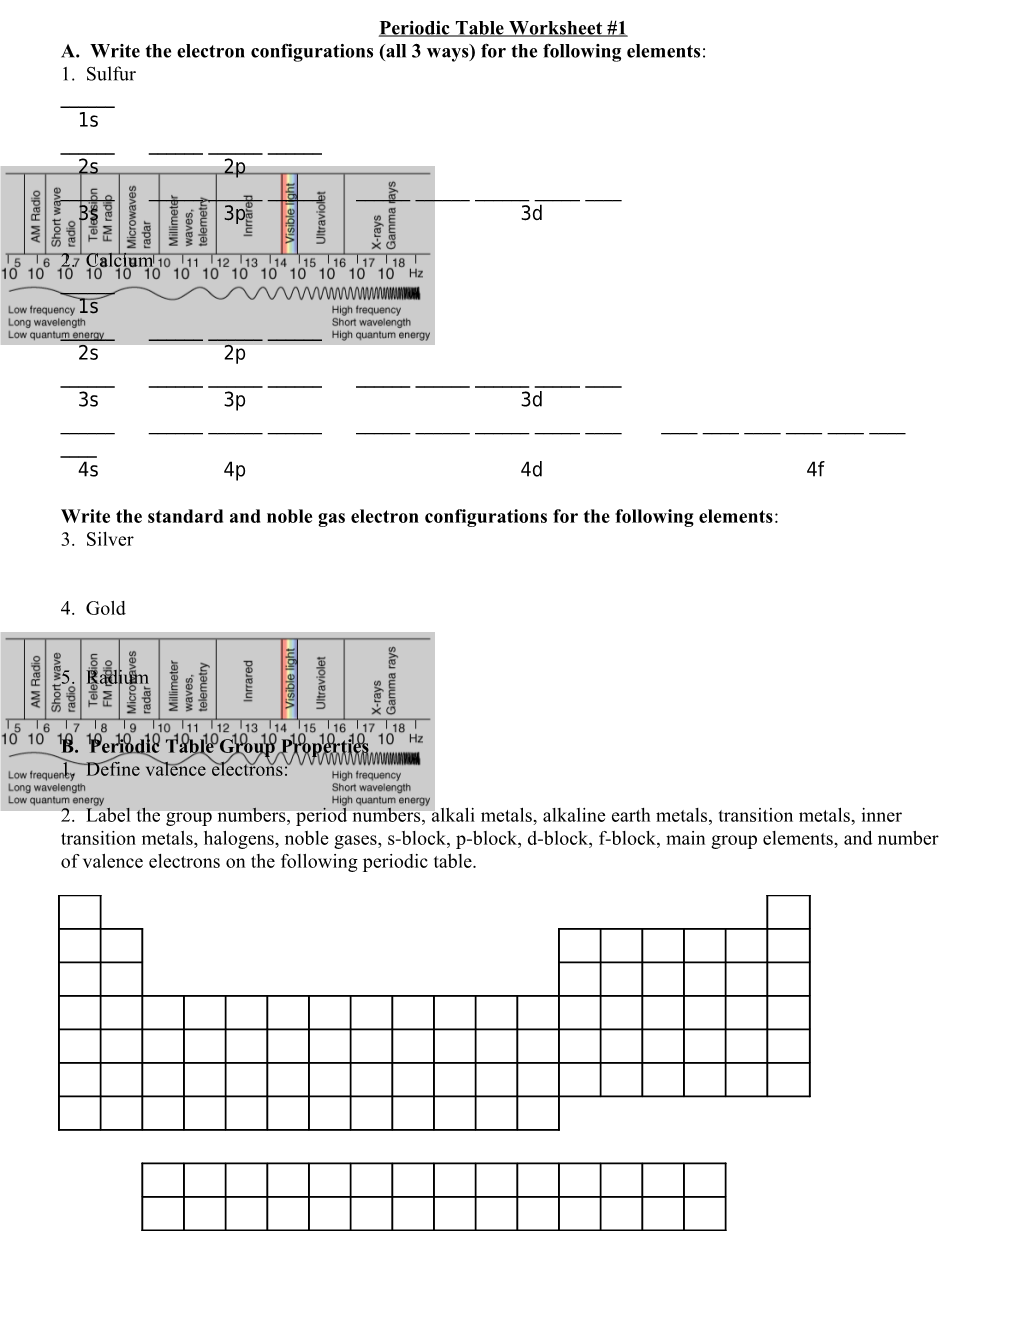 Periodic Table Worksheet #1 (Trends)